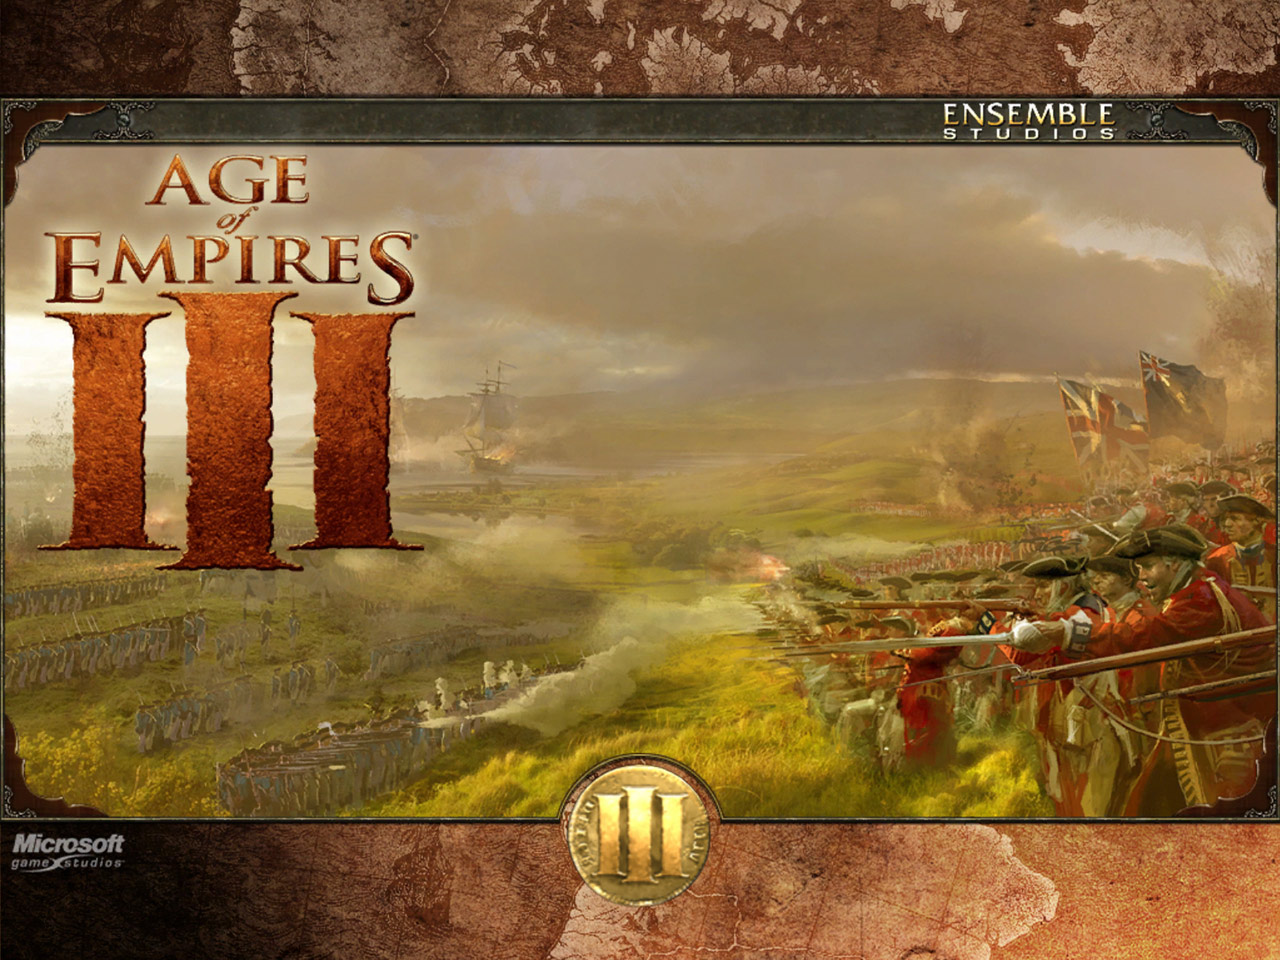 age of empires 3 complete collection product key steam